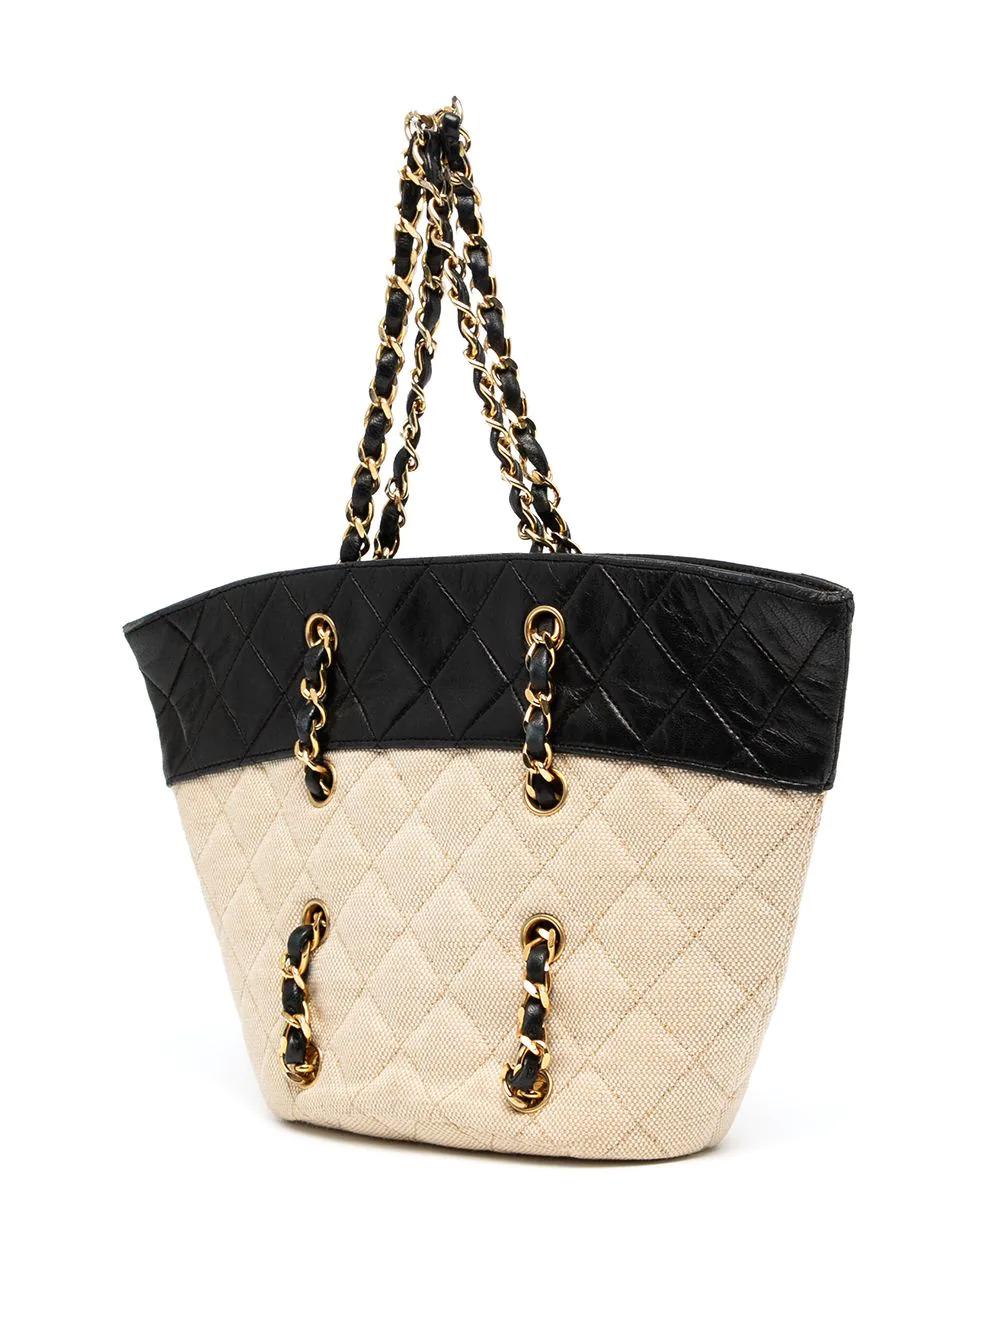 This effortlessly cool Chanel basket-style handbag from 2010-2011 features a diamond-stitched canvas body in a classic beige and a contrasting black lambskin leather top, complemented by the signature Chanel gold-tone chain handles running through